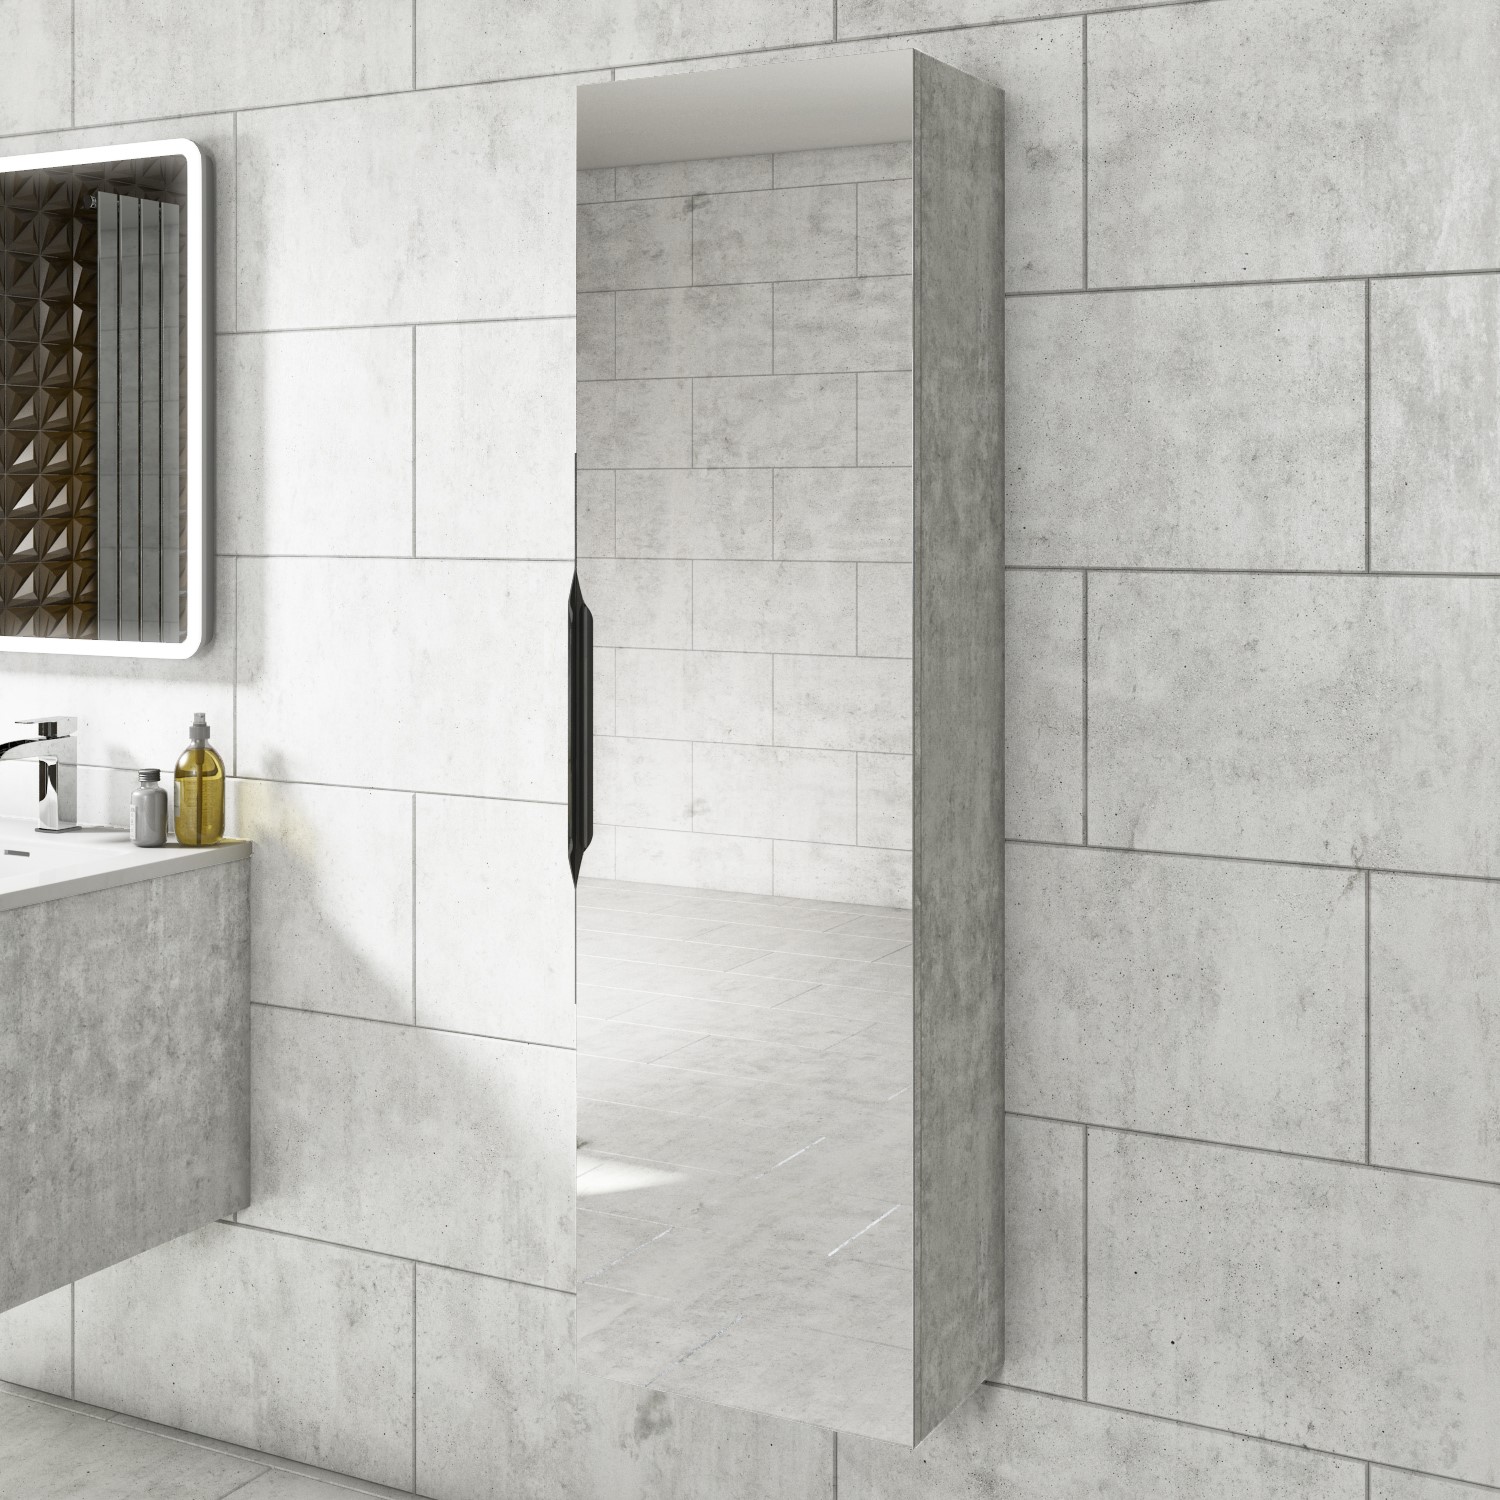 Grade A1 400mm Concrete Mirrored Wall, Bathroom Tall Cabinet With Mirror